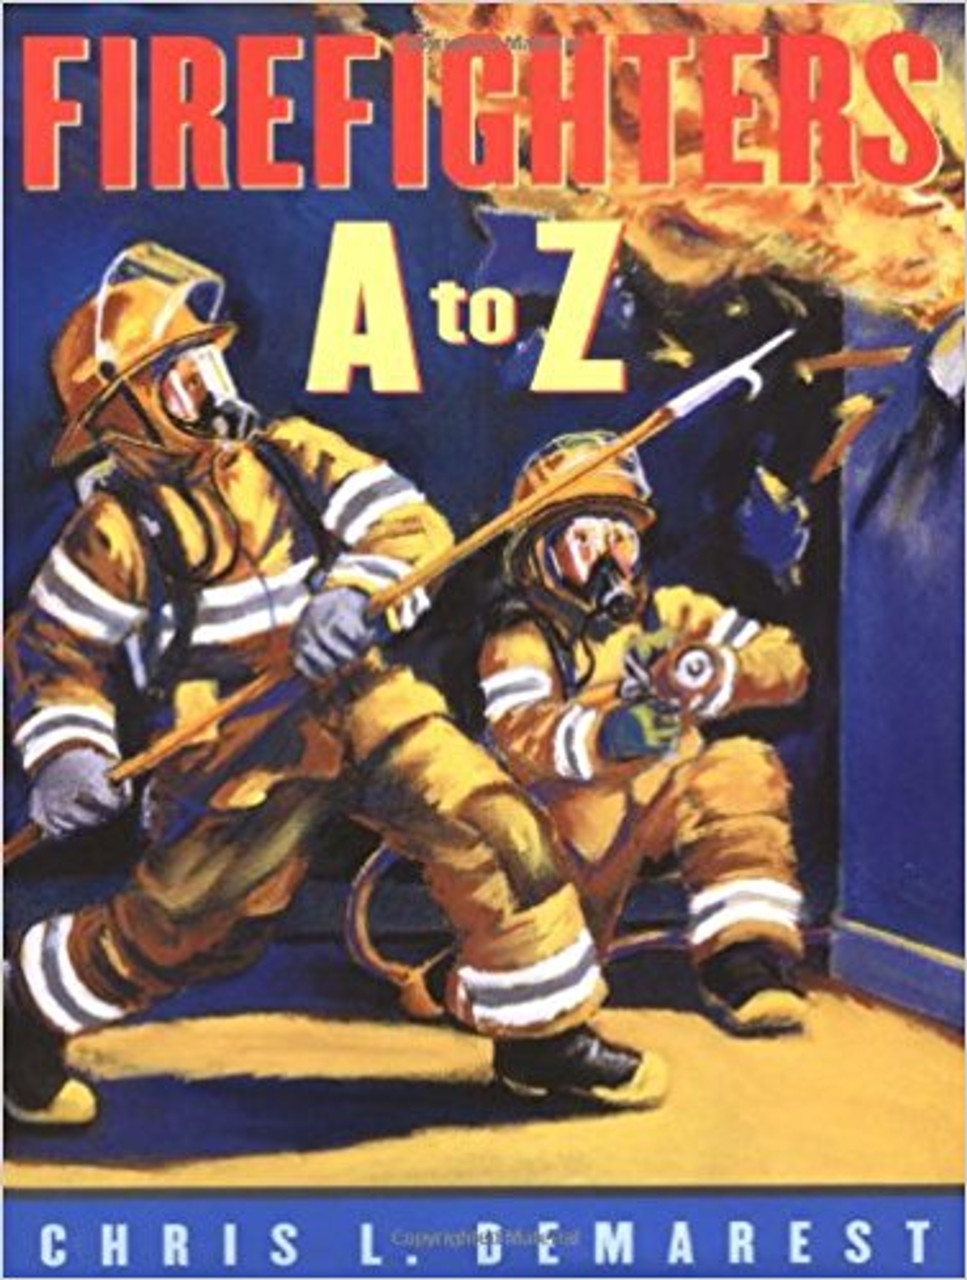 From A to Z, volunteer firefighter and fine artist, Demarest, presents a day in the life of firefighters whose job it is to answer the call to put out fires and save property and lives. Full color.